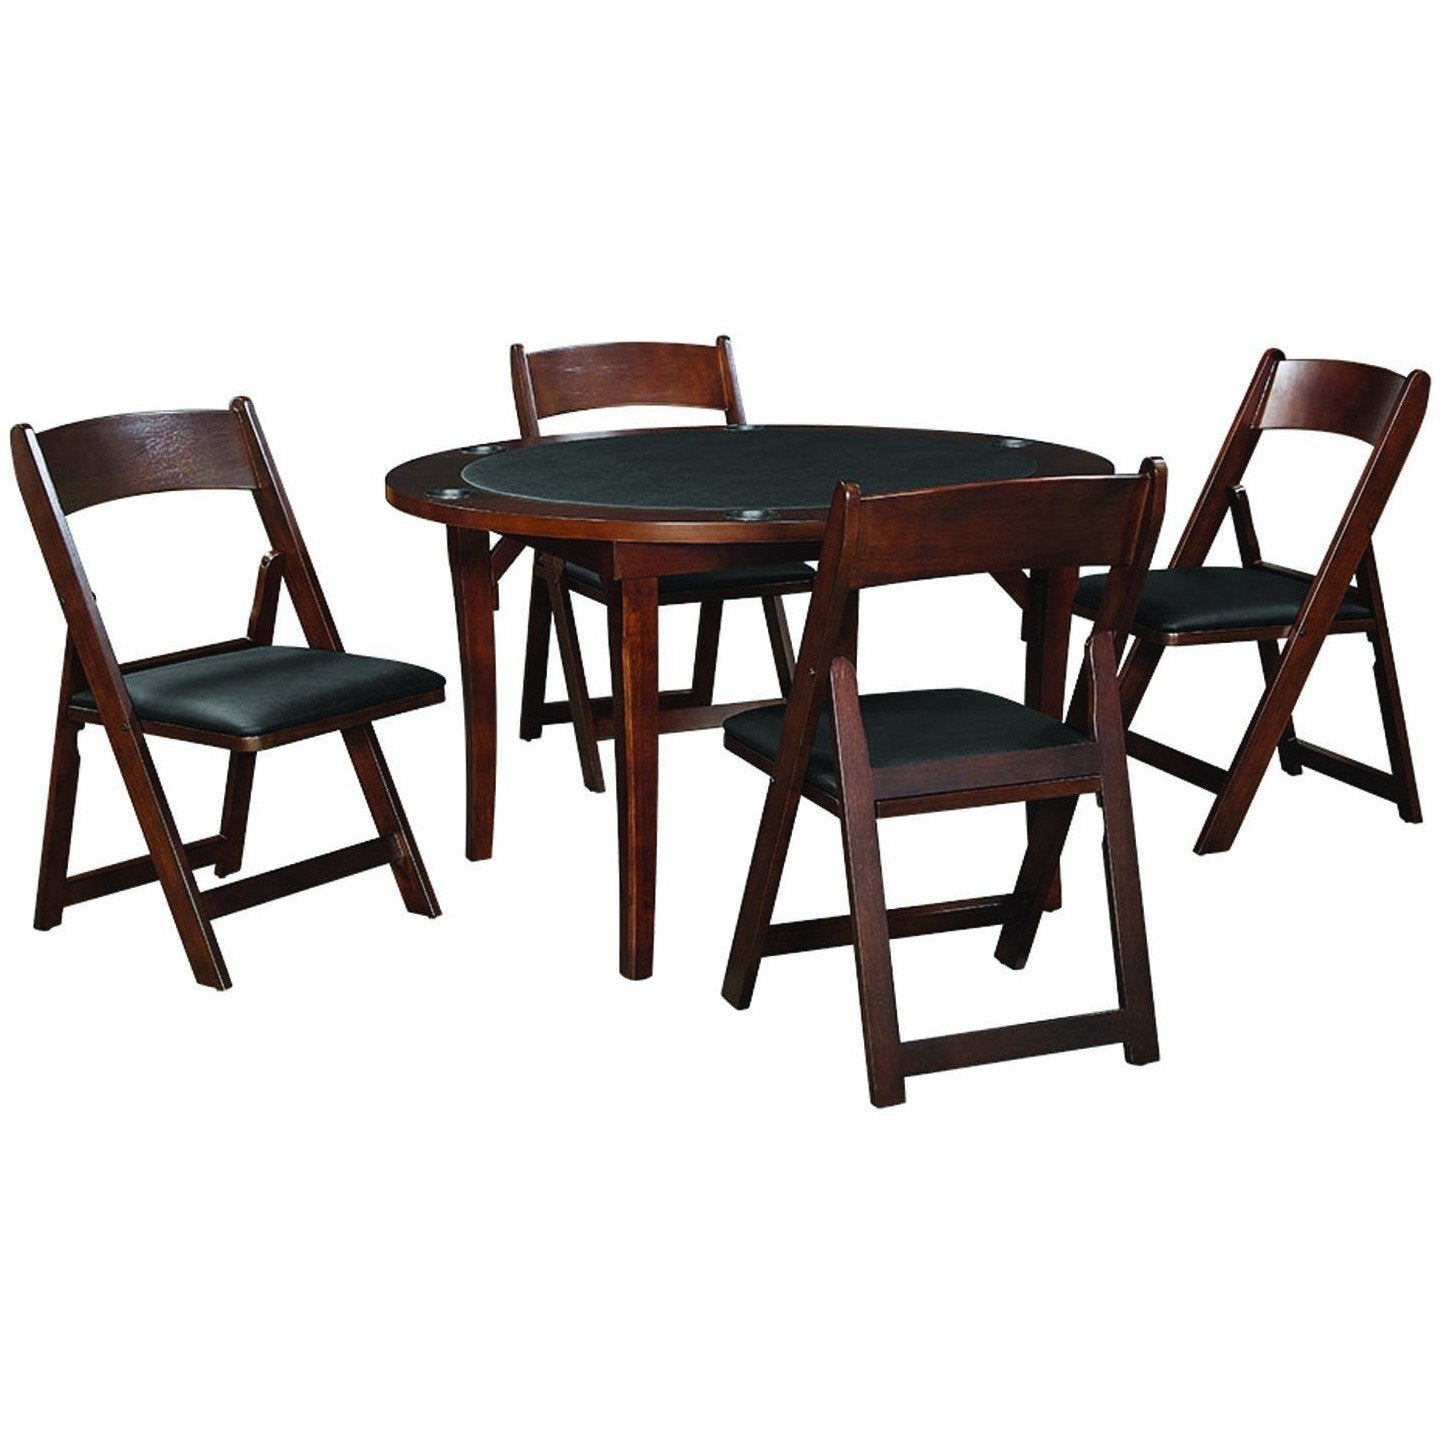 RAM Game Room 48" Folding Poker Table Set with 4 Folding Chairs - Gaming Blaze